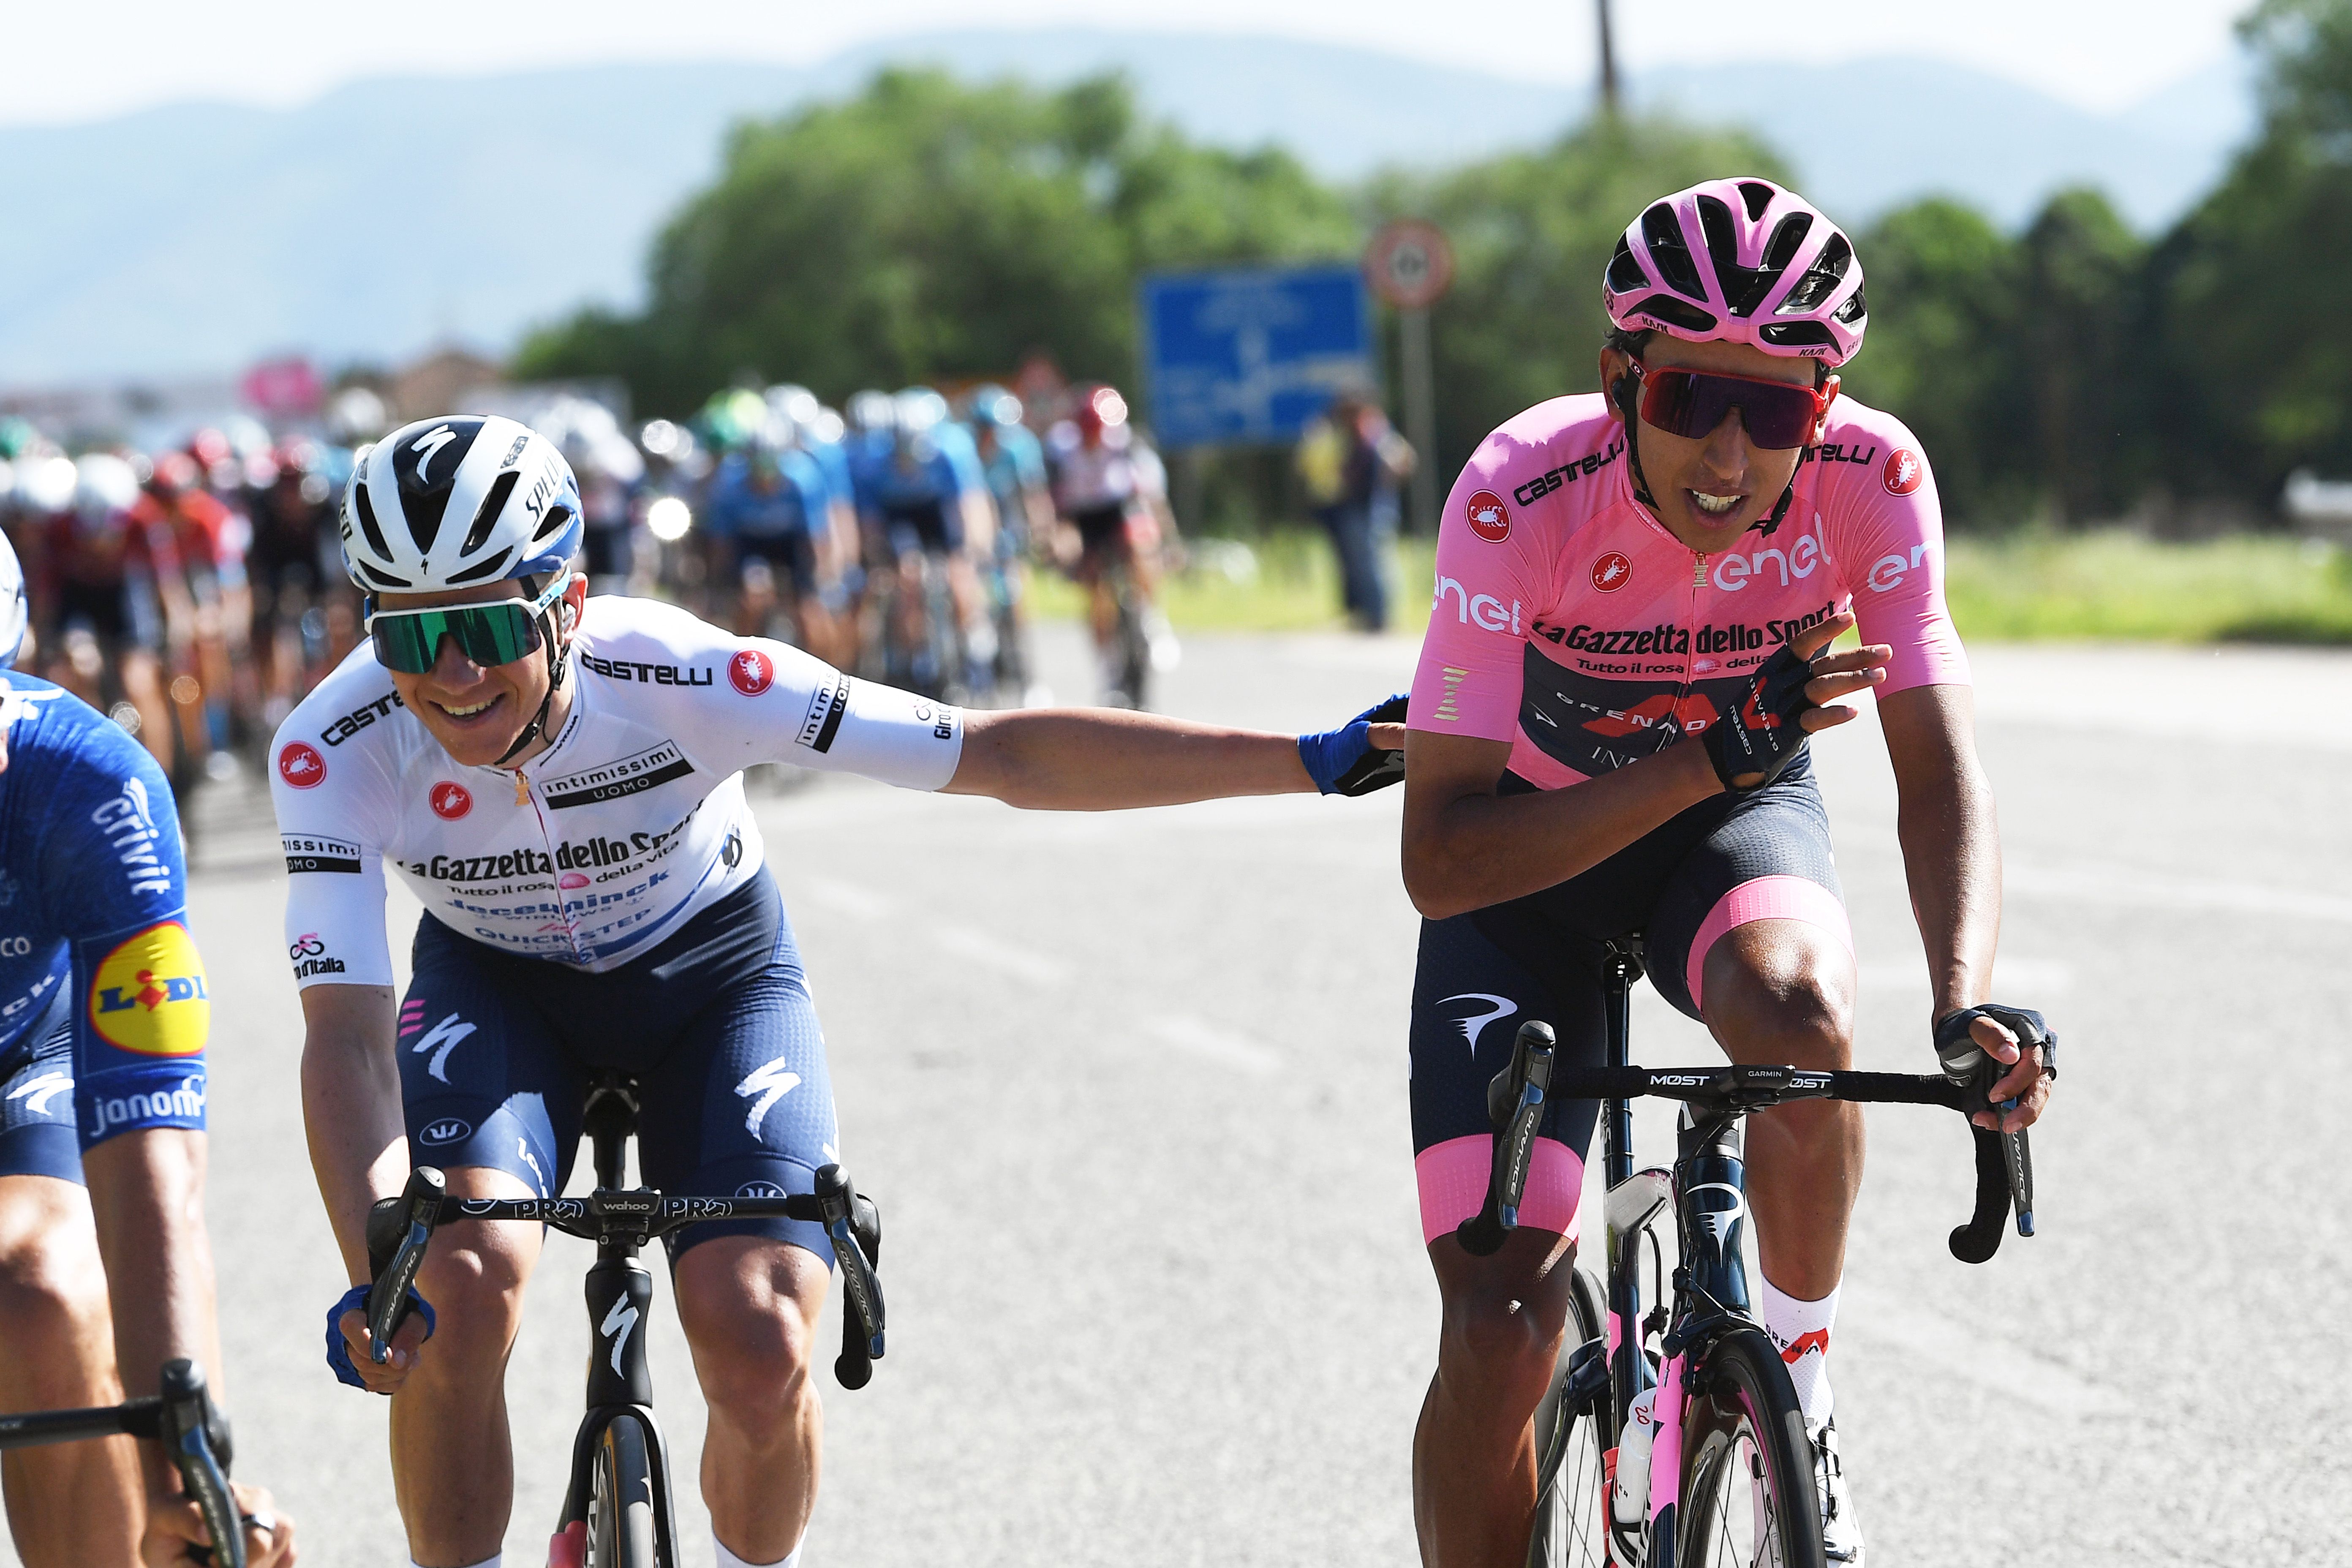 Remco Evenepoel and Egan Bernal in the white and pink jerseys, respectively.